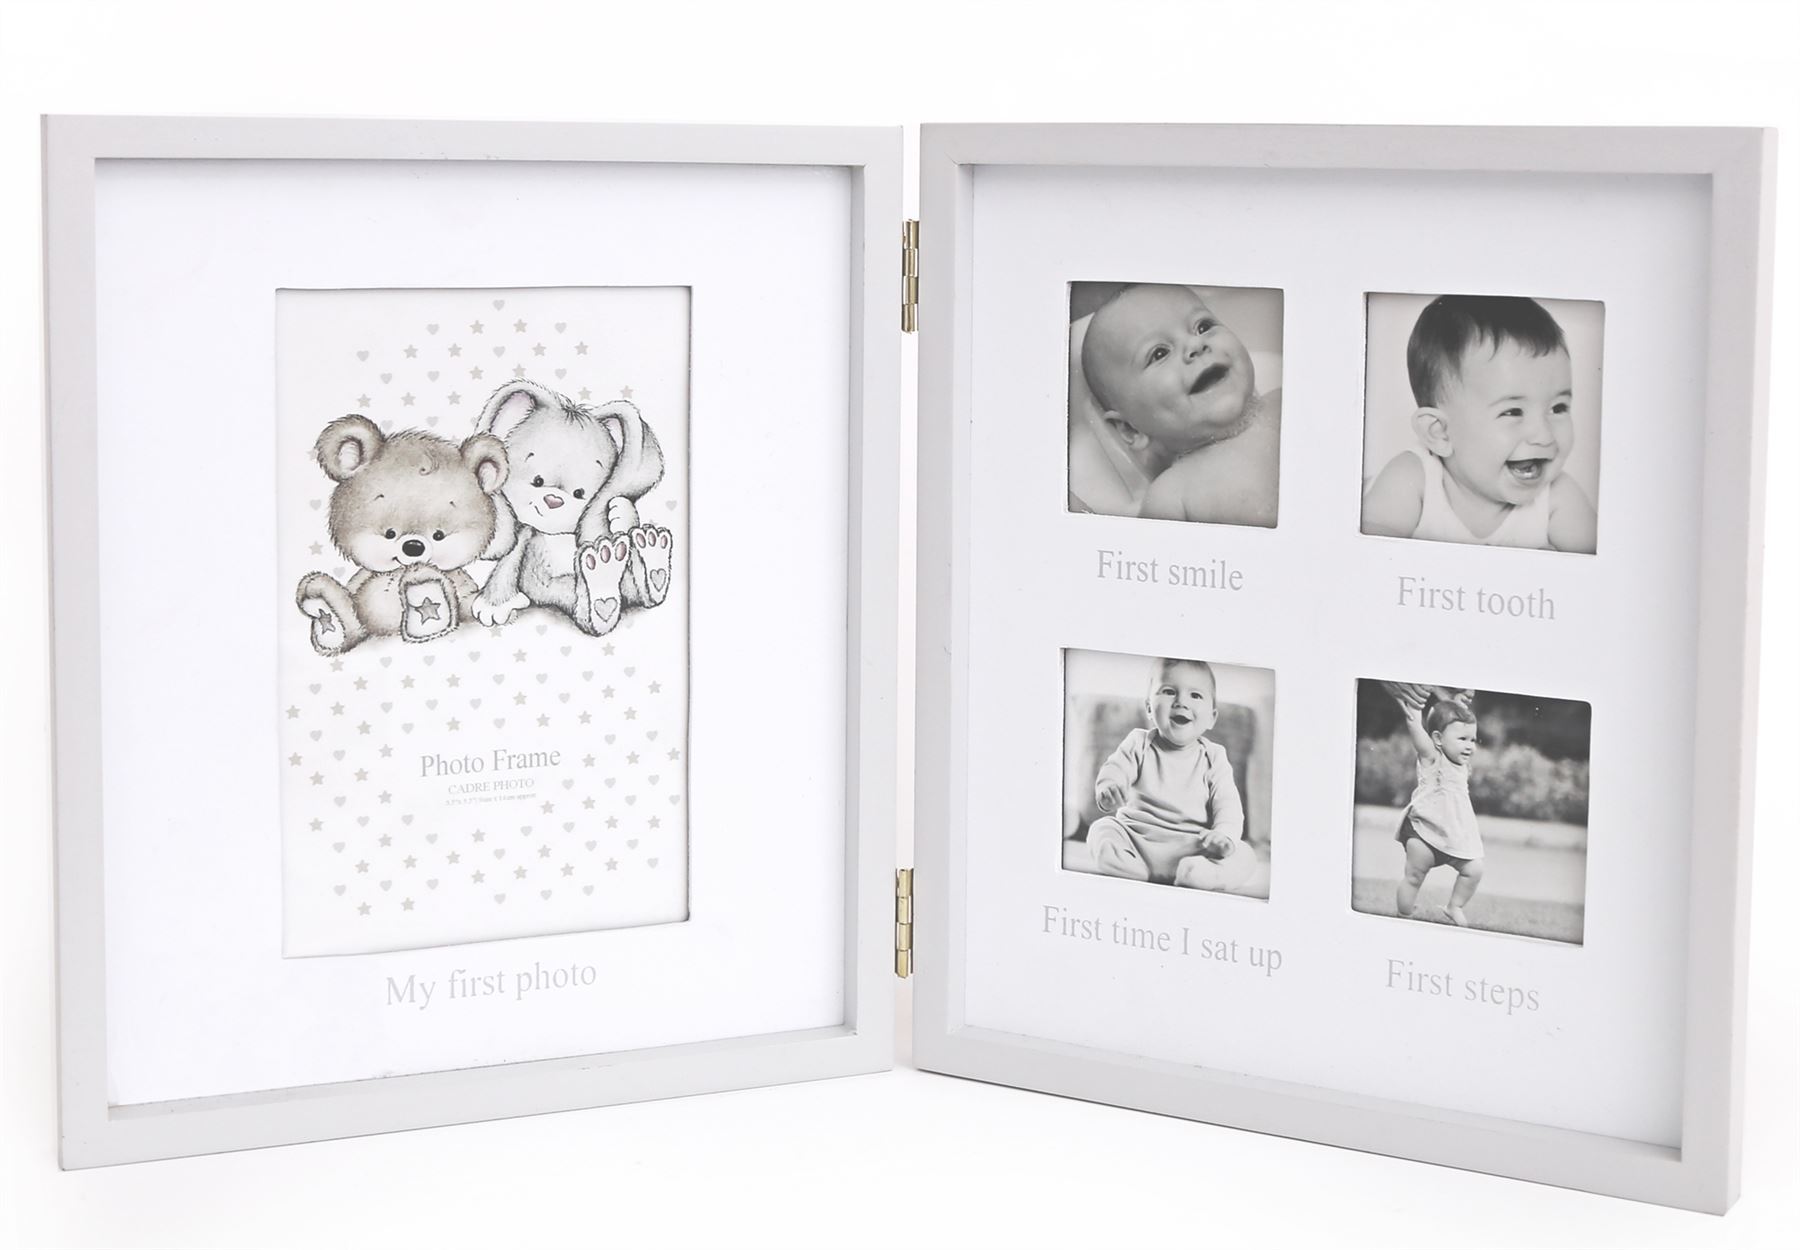 Baby 4 Aperture Double Wooden Photo Picture Frame ~ My Firsts Photo Frame - A & M News and Gifts